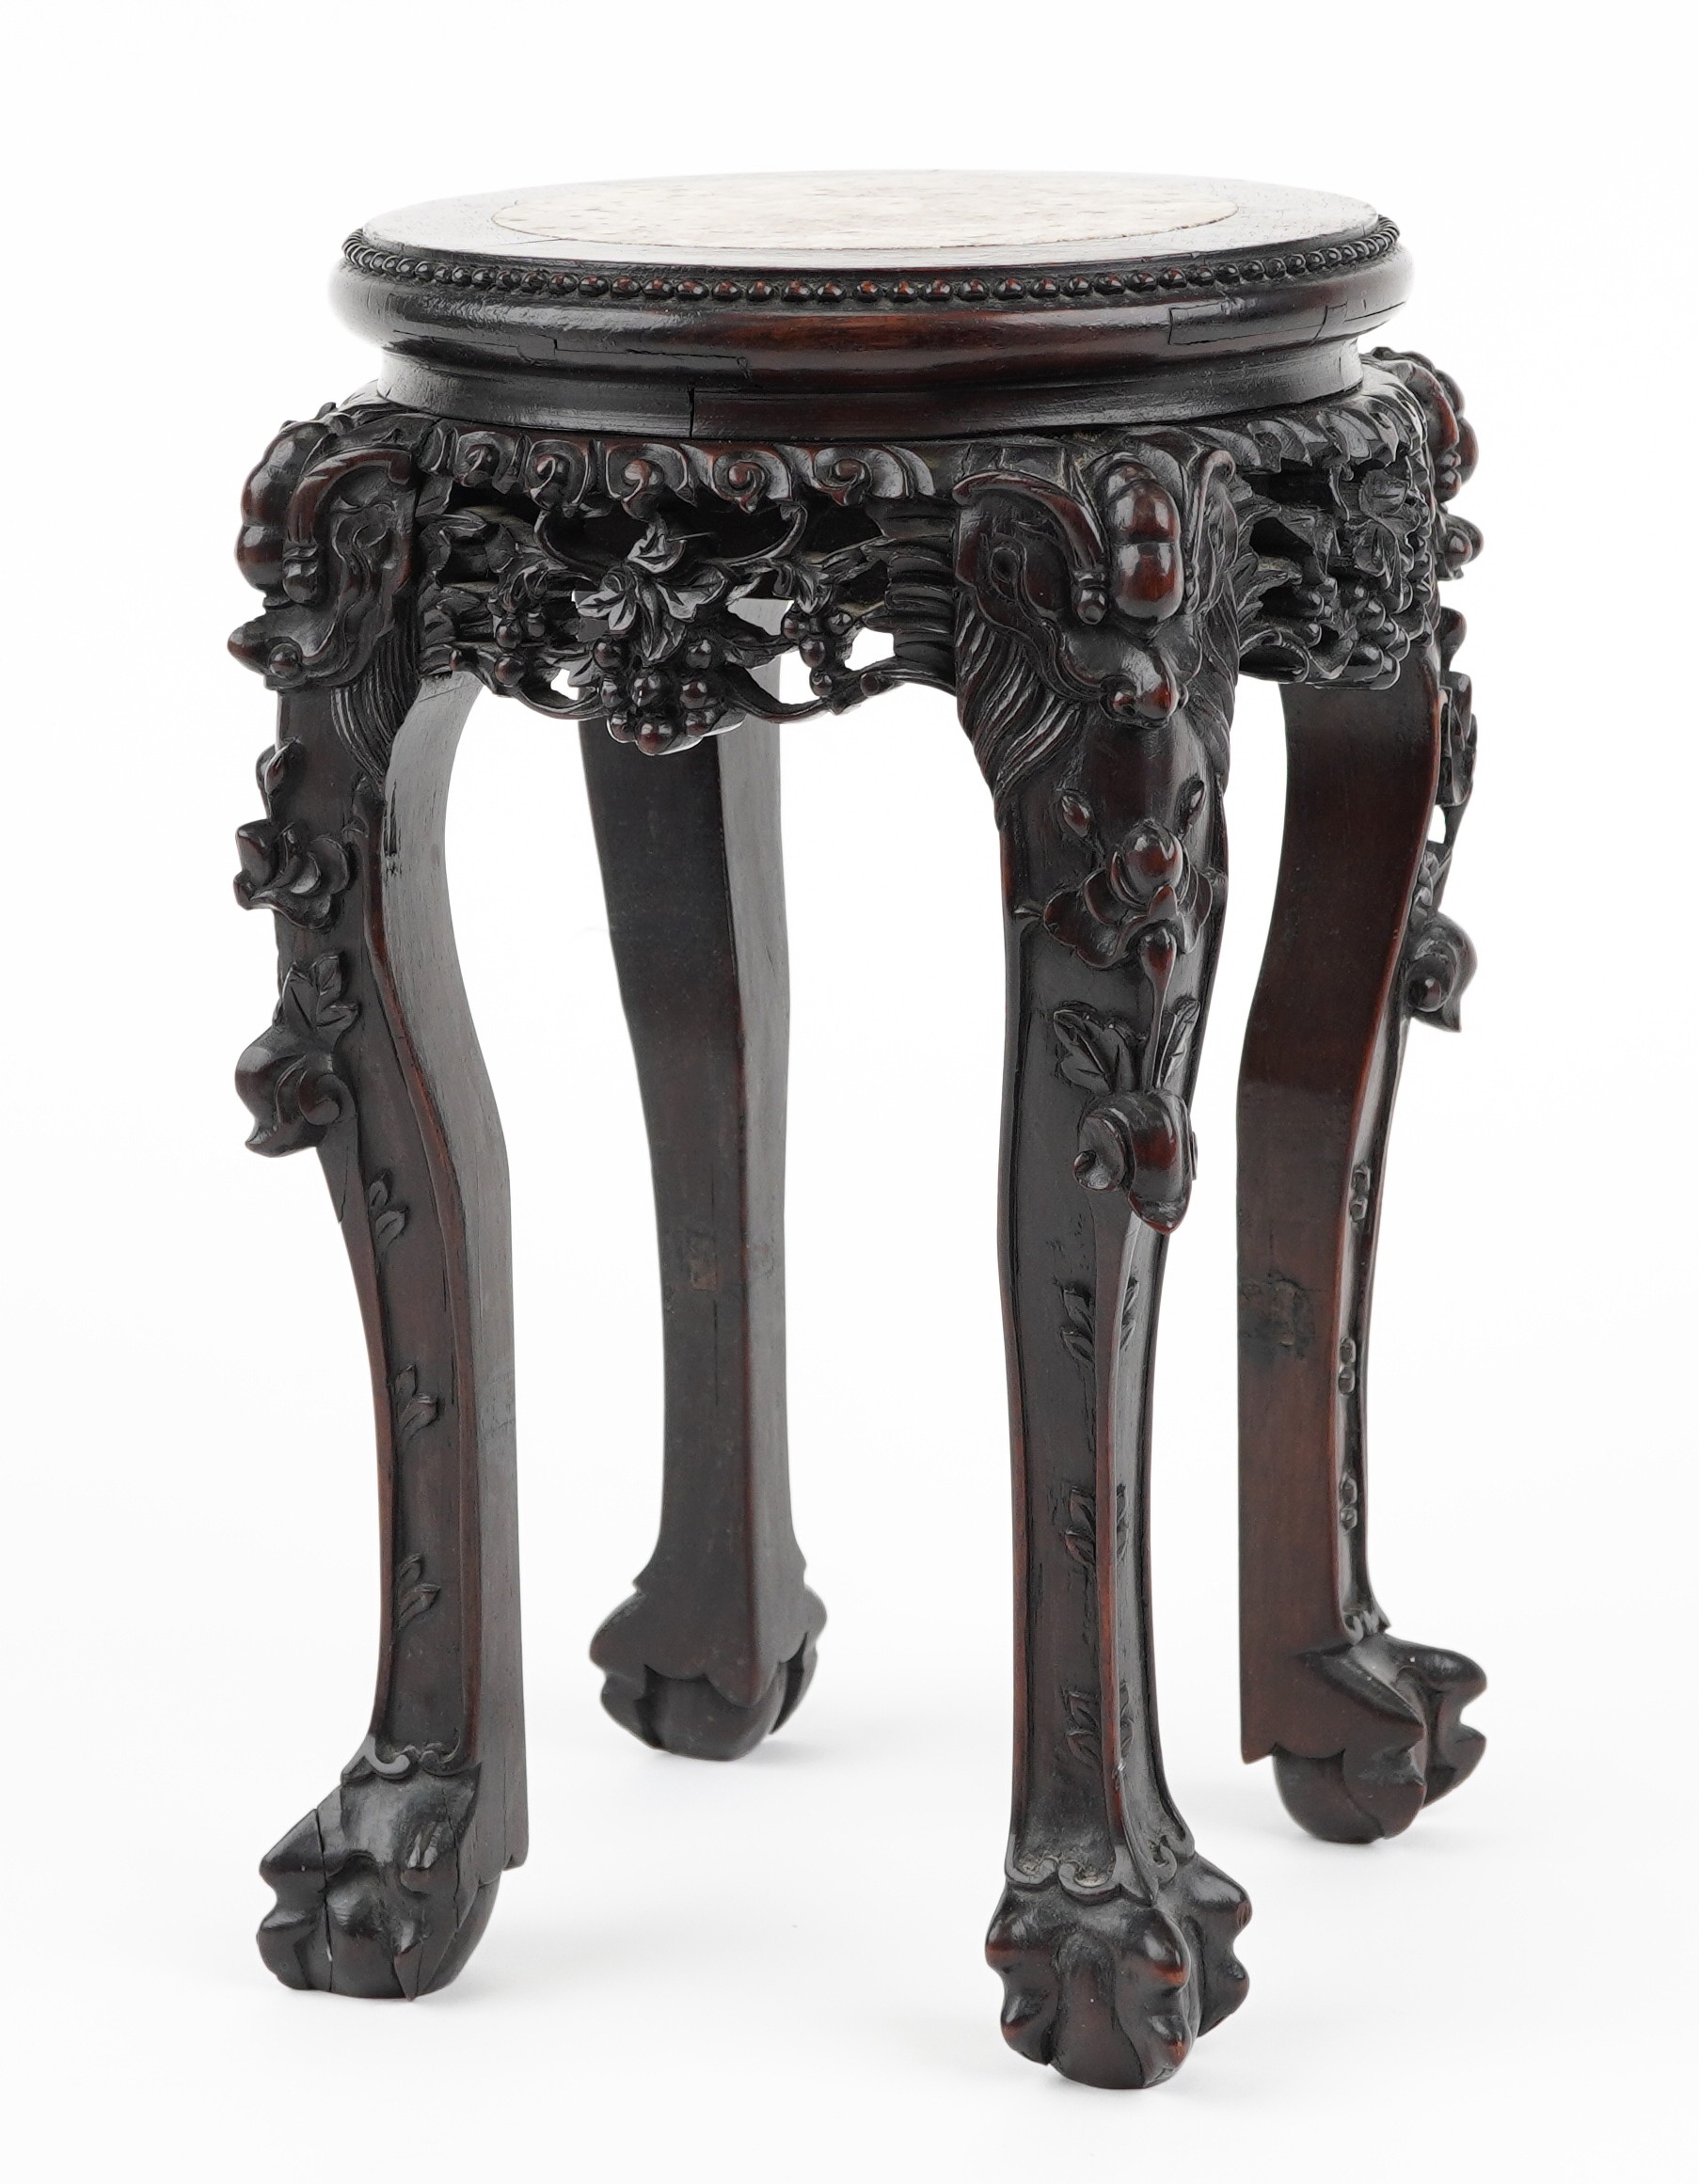 Chinese hardwood vase stand with inset marble top finely carved with mythical faces and foliage, - Image 3 of 5